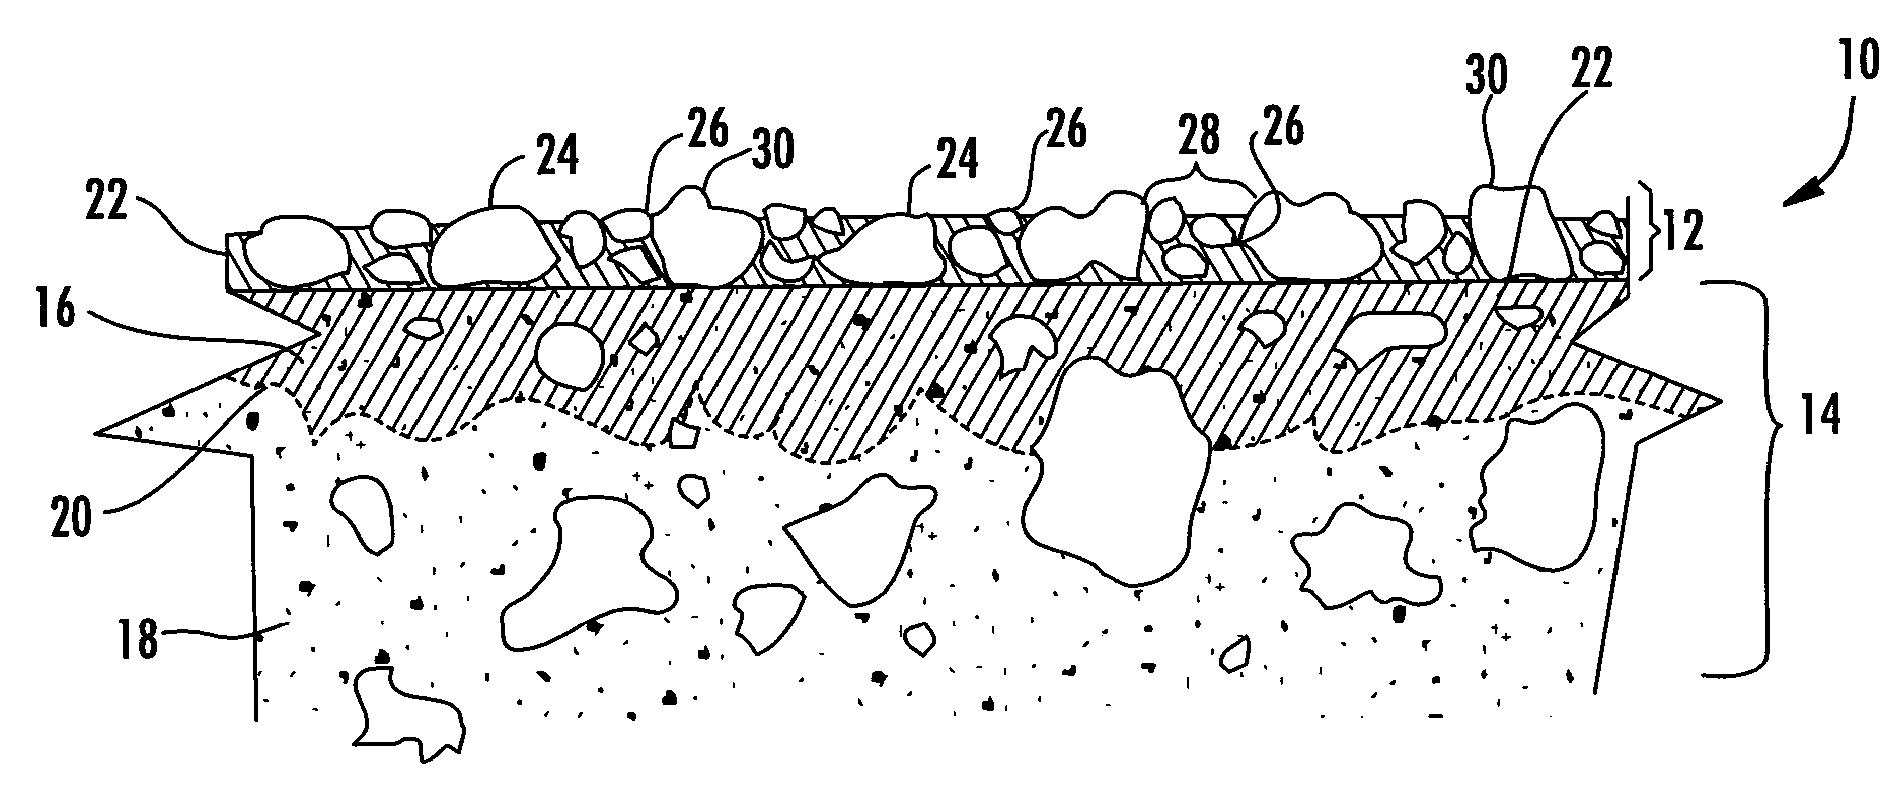 Composition and process of using an asphalt emulsion to convert an unpaved surface into a paved surface